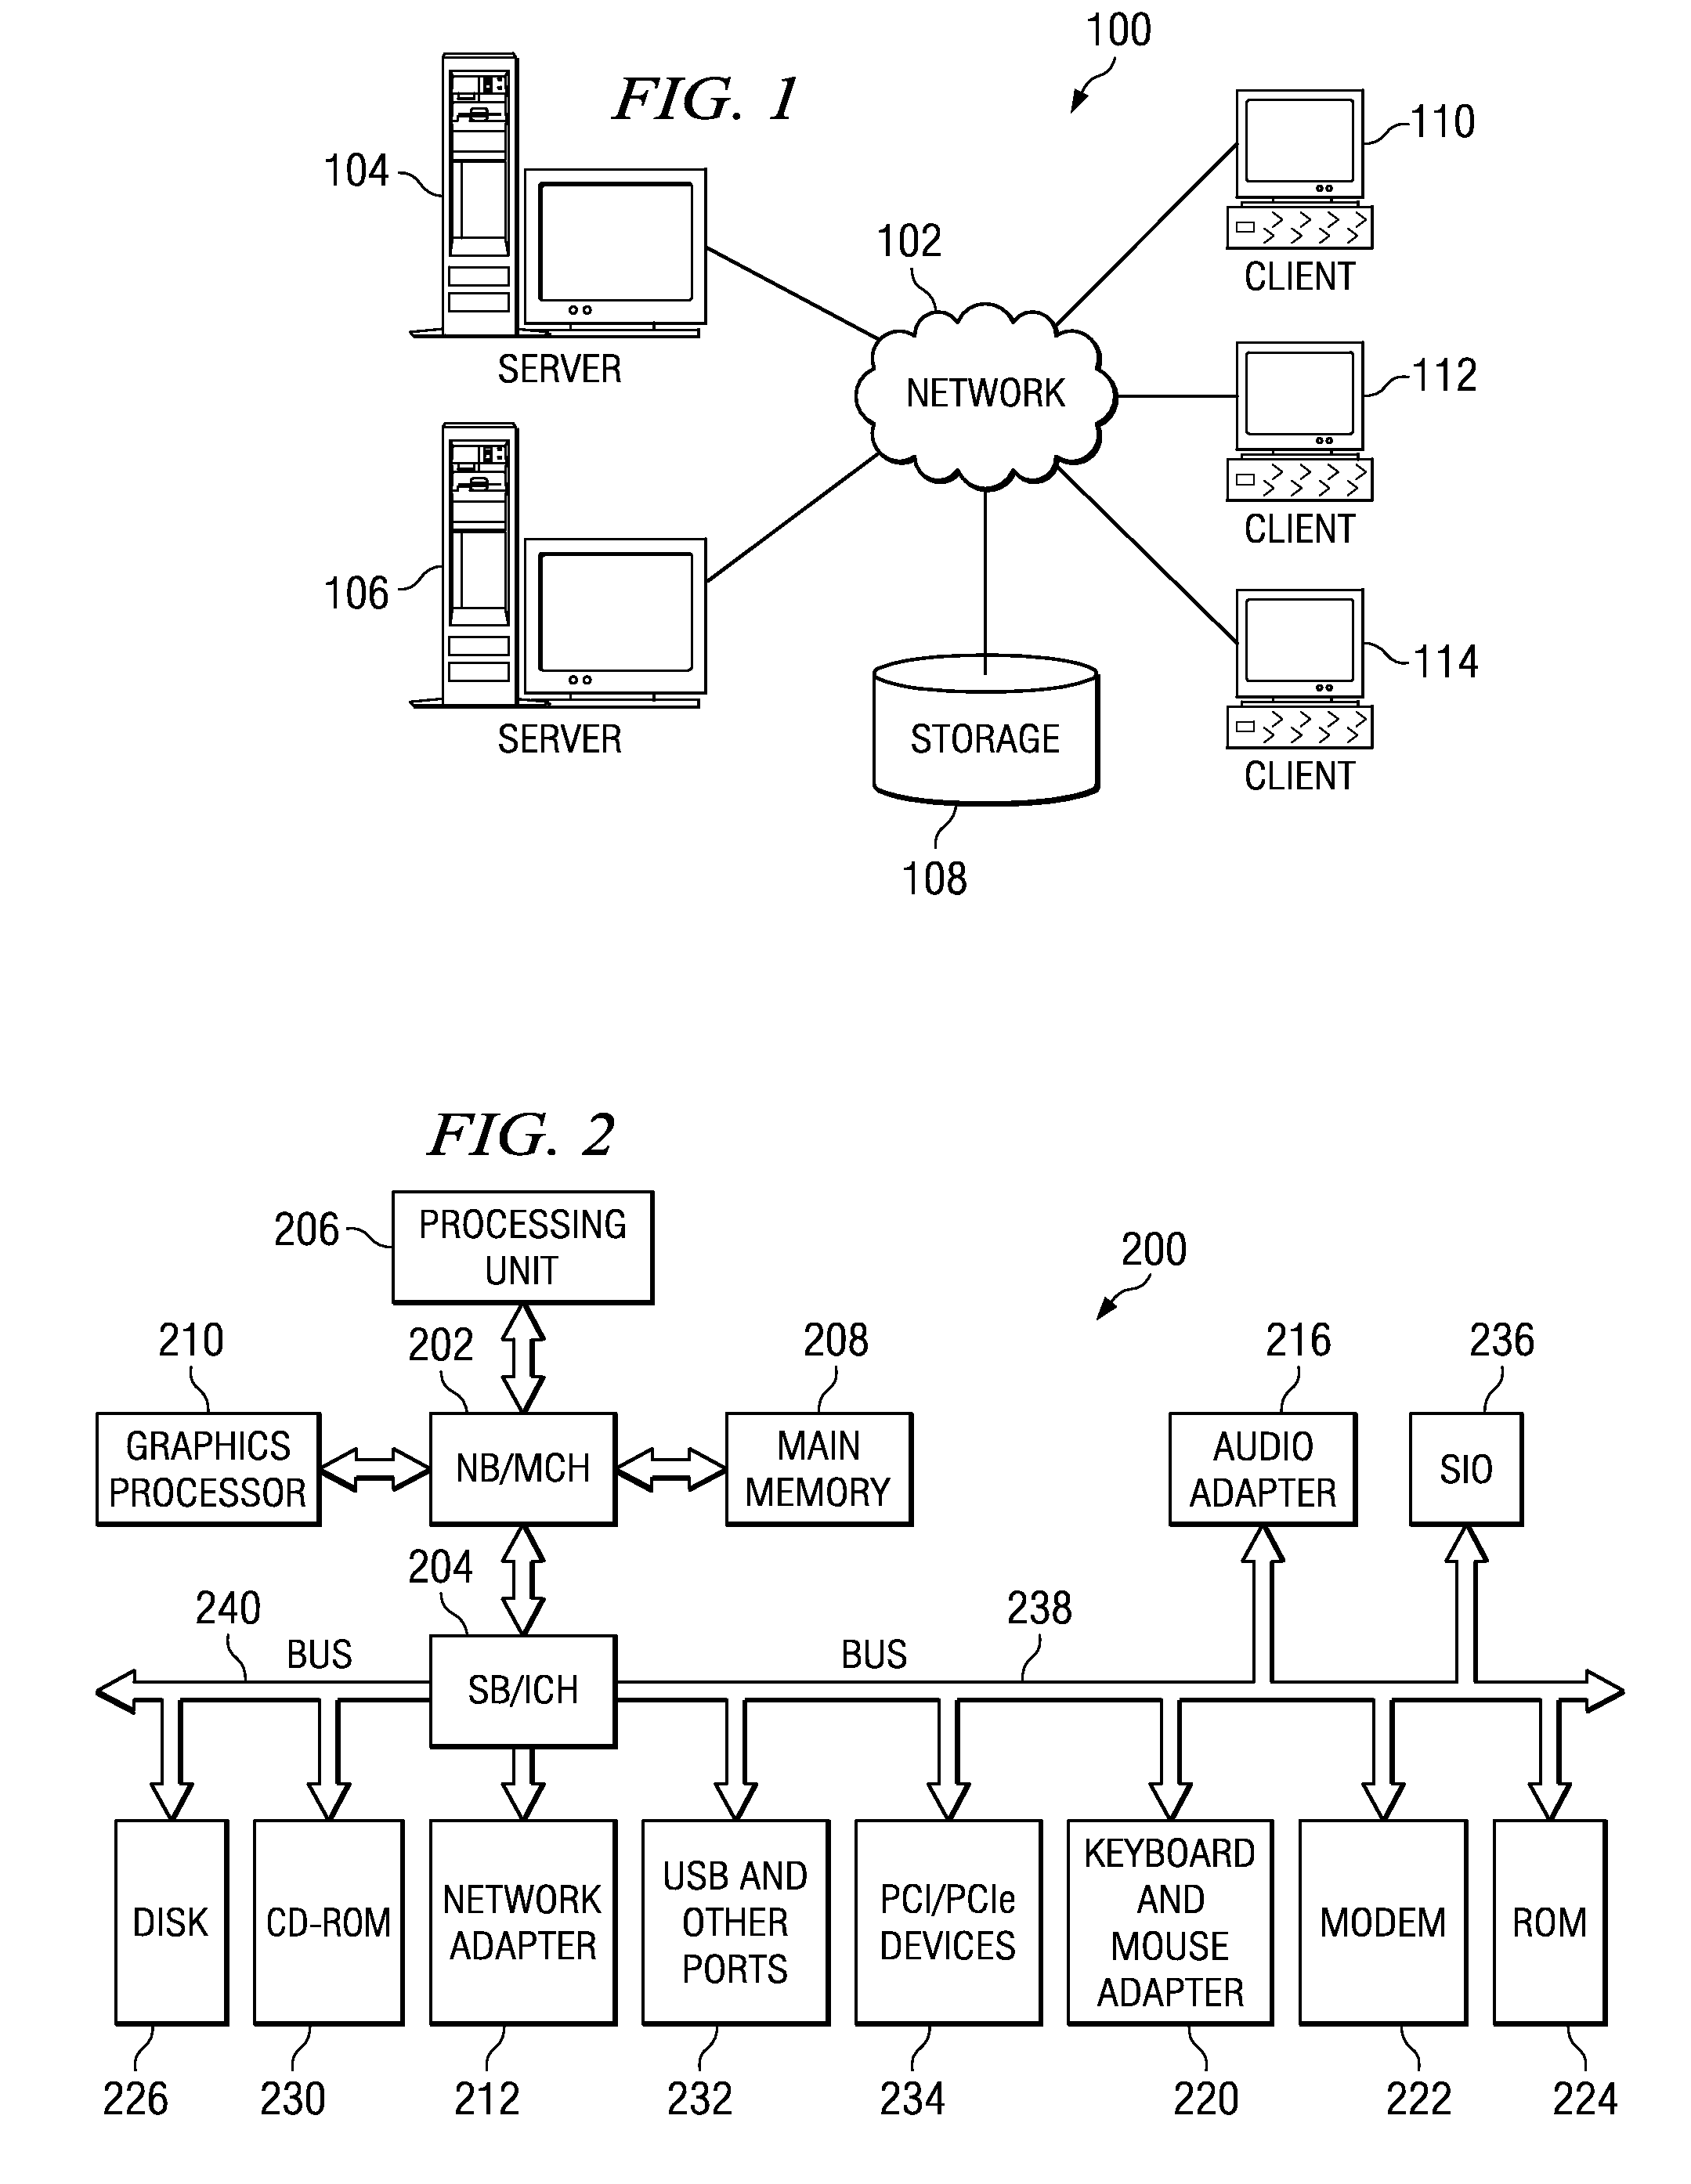 Mapping File Fragments to File Information and Tagging in a Segmented File Sharing System